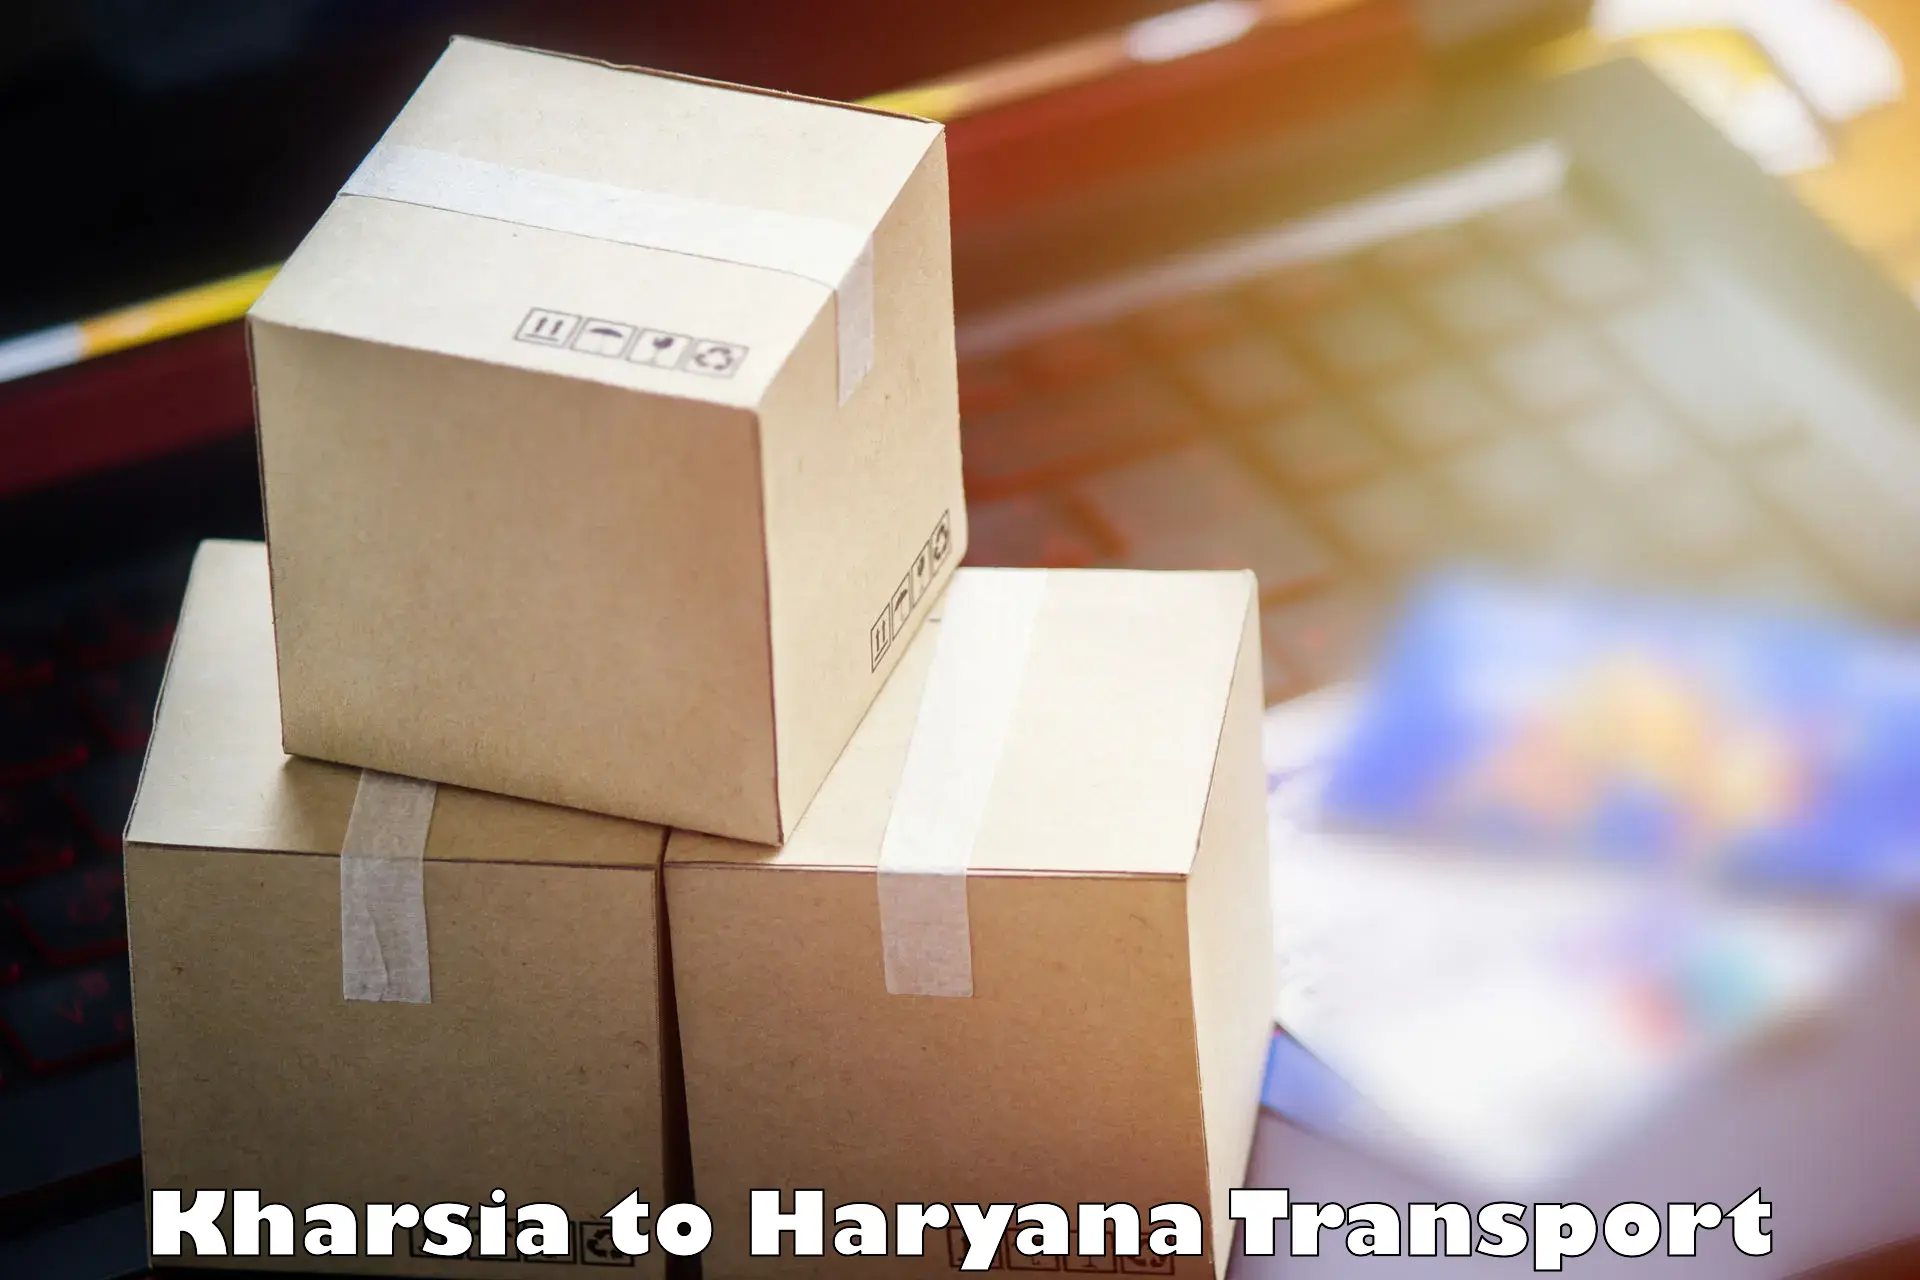 Nearby transport service Kharsia to Sonipat